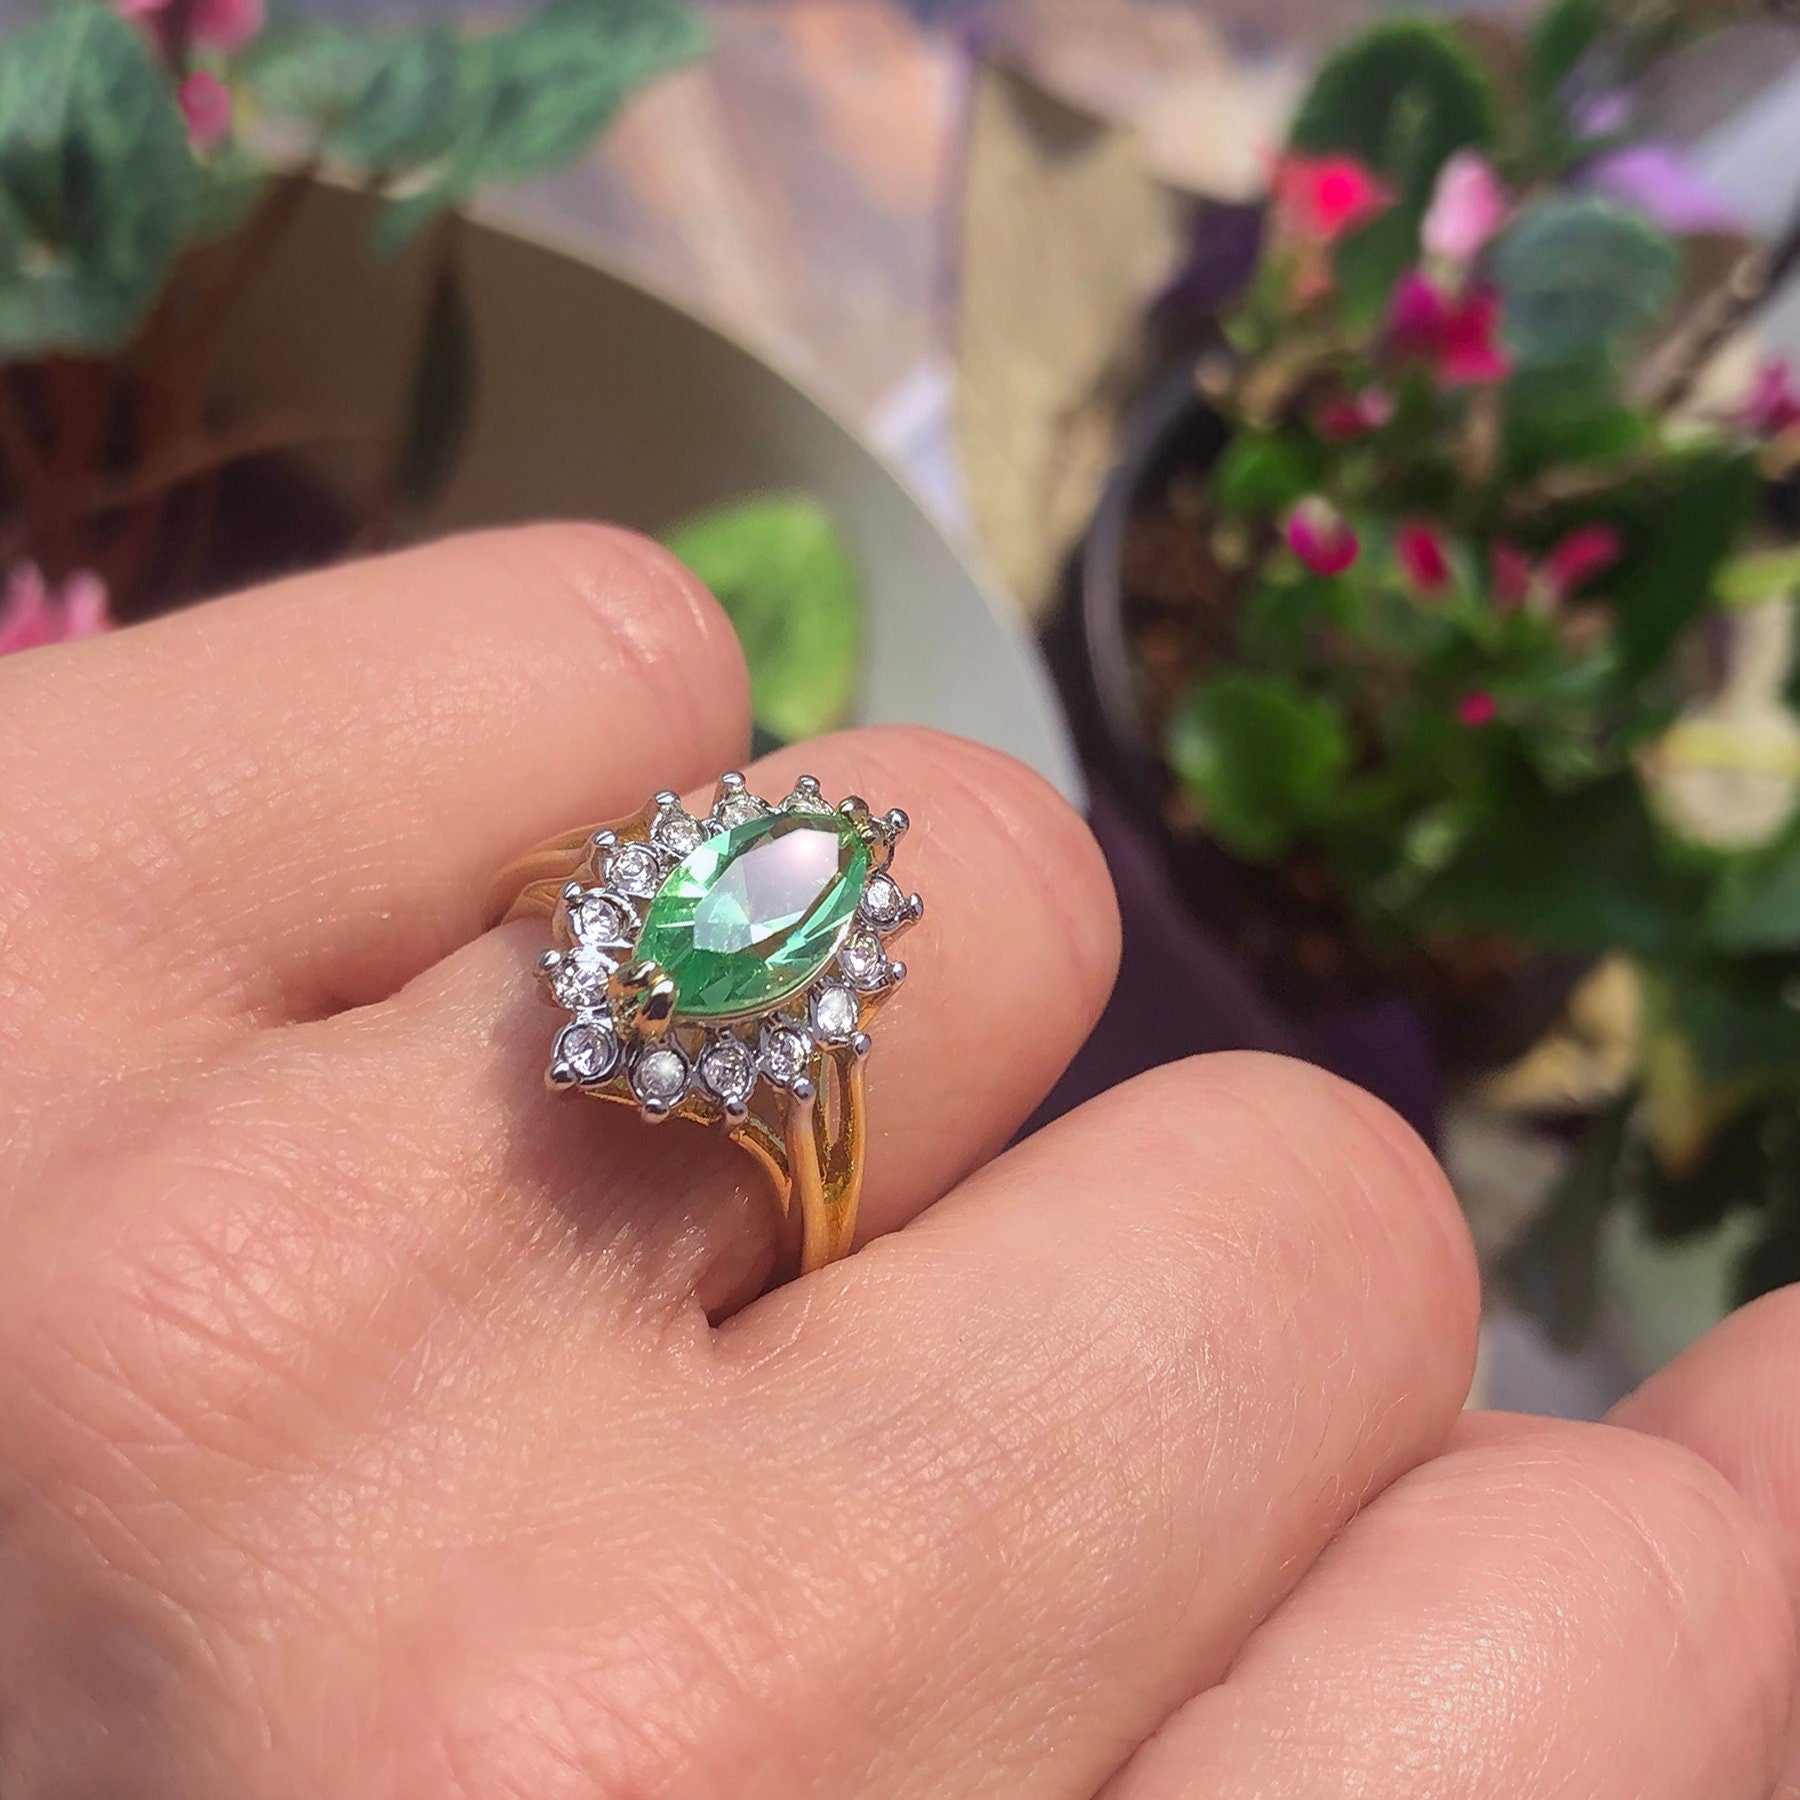 Vintage Ring Peridot and Clear Swarovski Crystals 18k Gold Plated August Birthstone #R1891 - Limited Stock - Never Worn